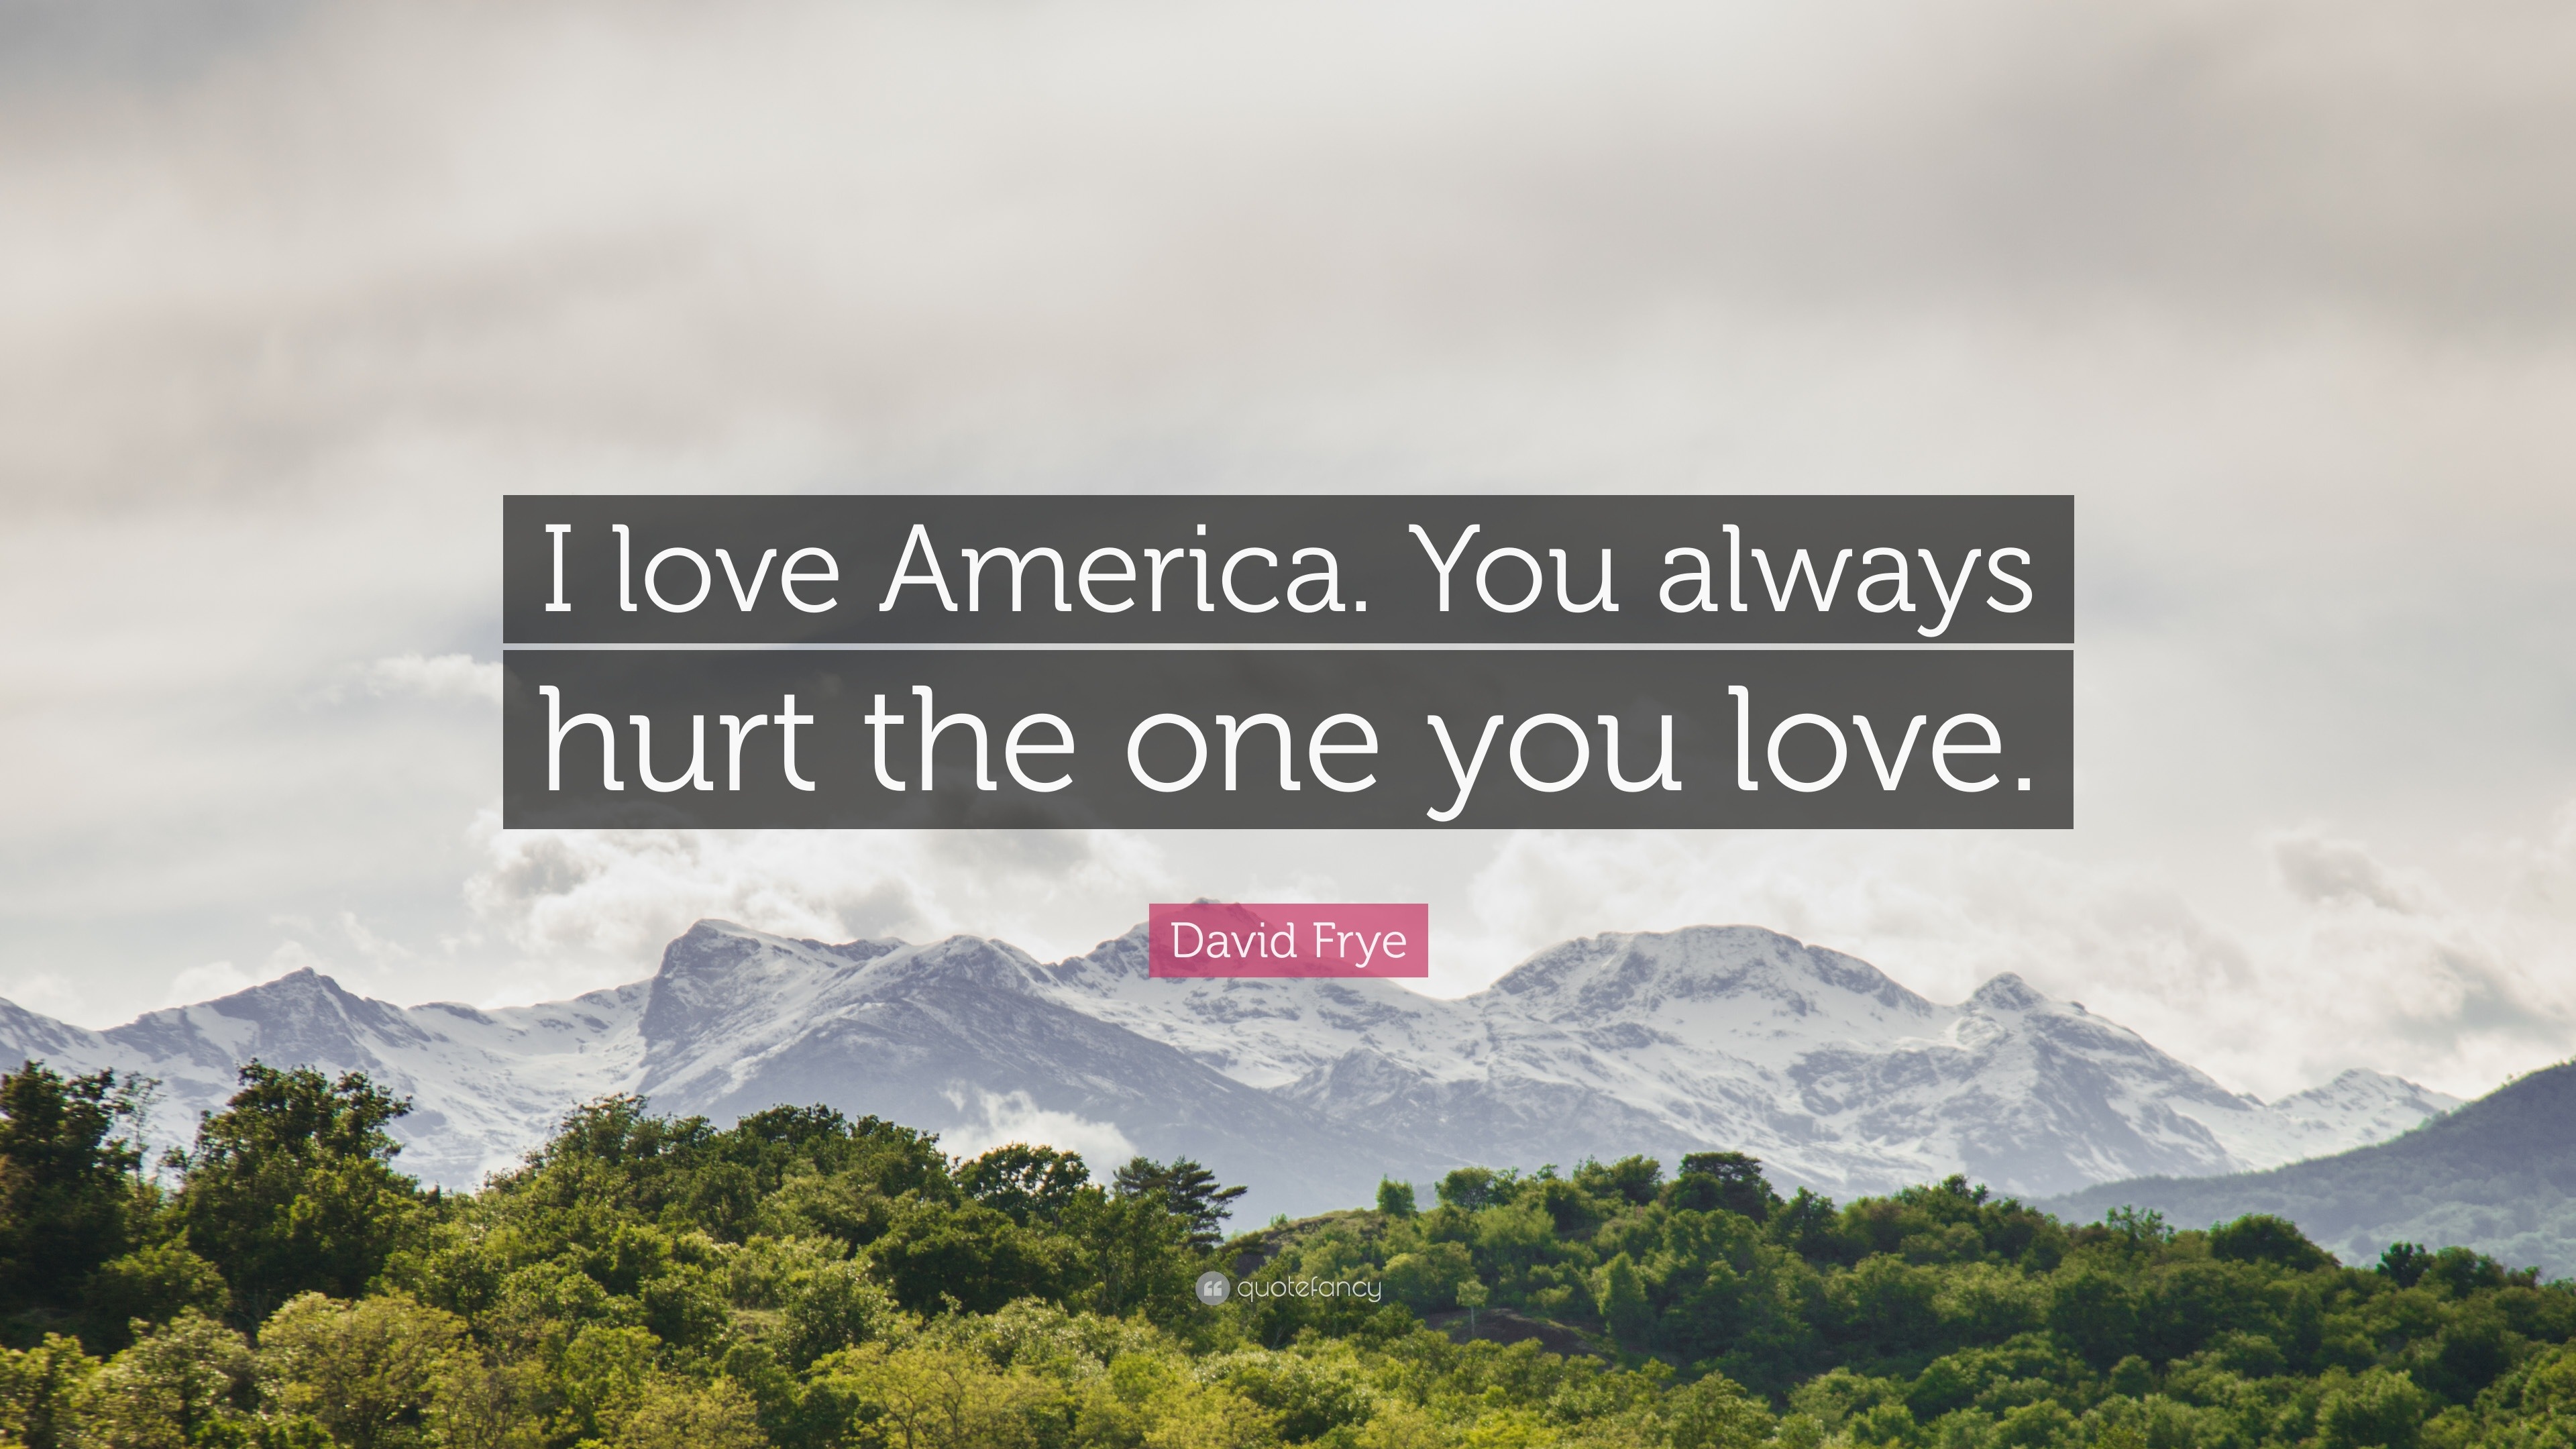 David Frye Quote “I love America You always hurt the one you love